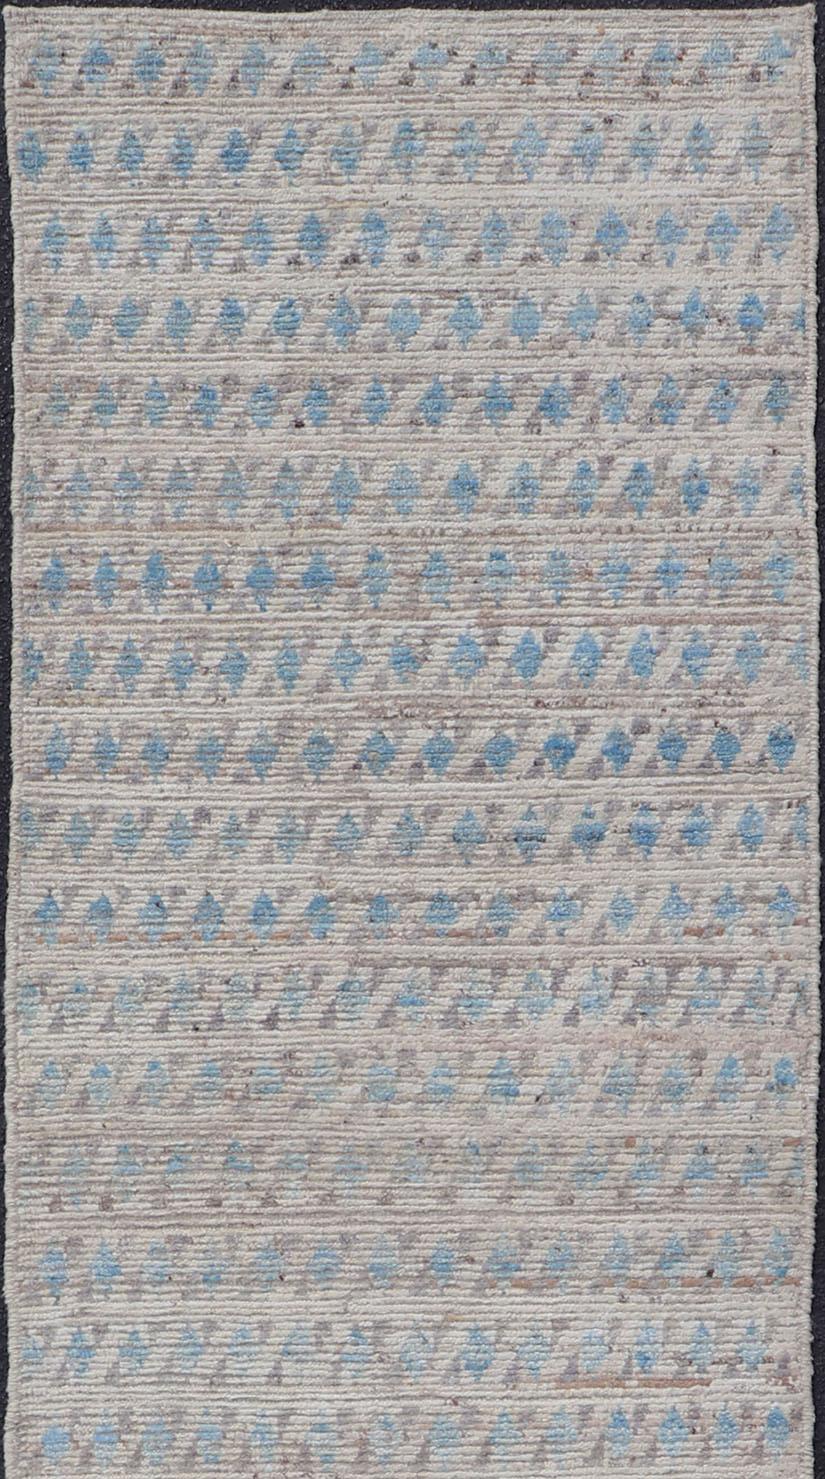 Modern piled rug with all-over tribal design in blue, rug AFG-32073, country of origin / type: Afghanistan / Piled, condition: new

This brand new rug features a modern tribal all-over design and a combination of tribal and modern. The color